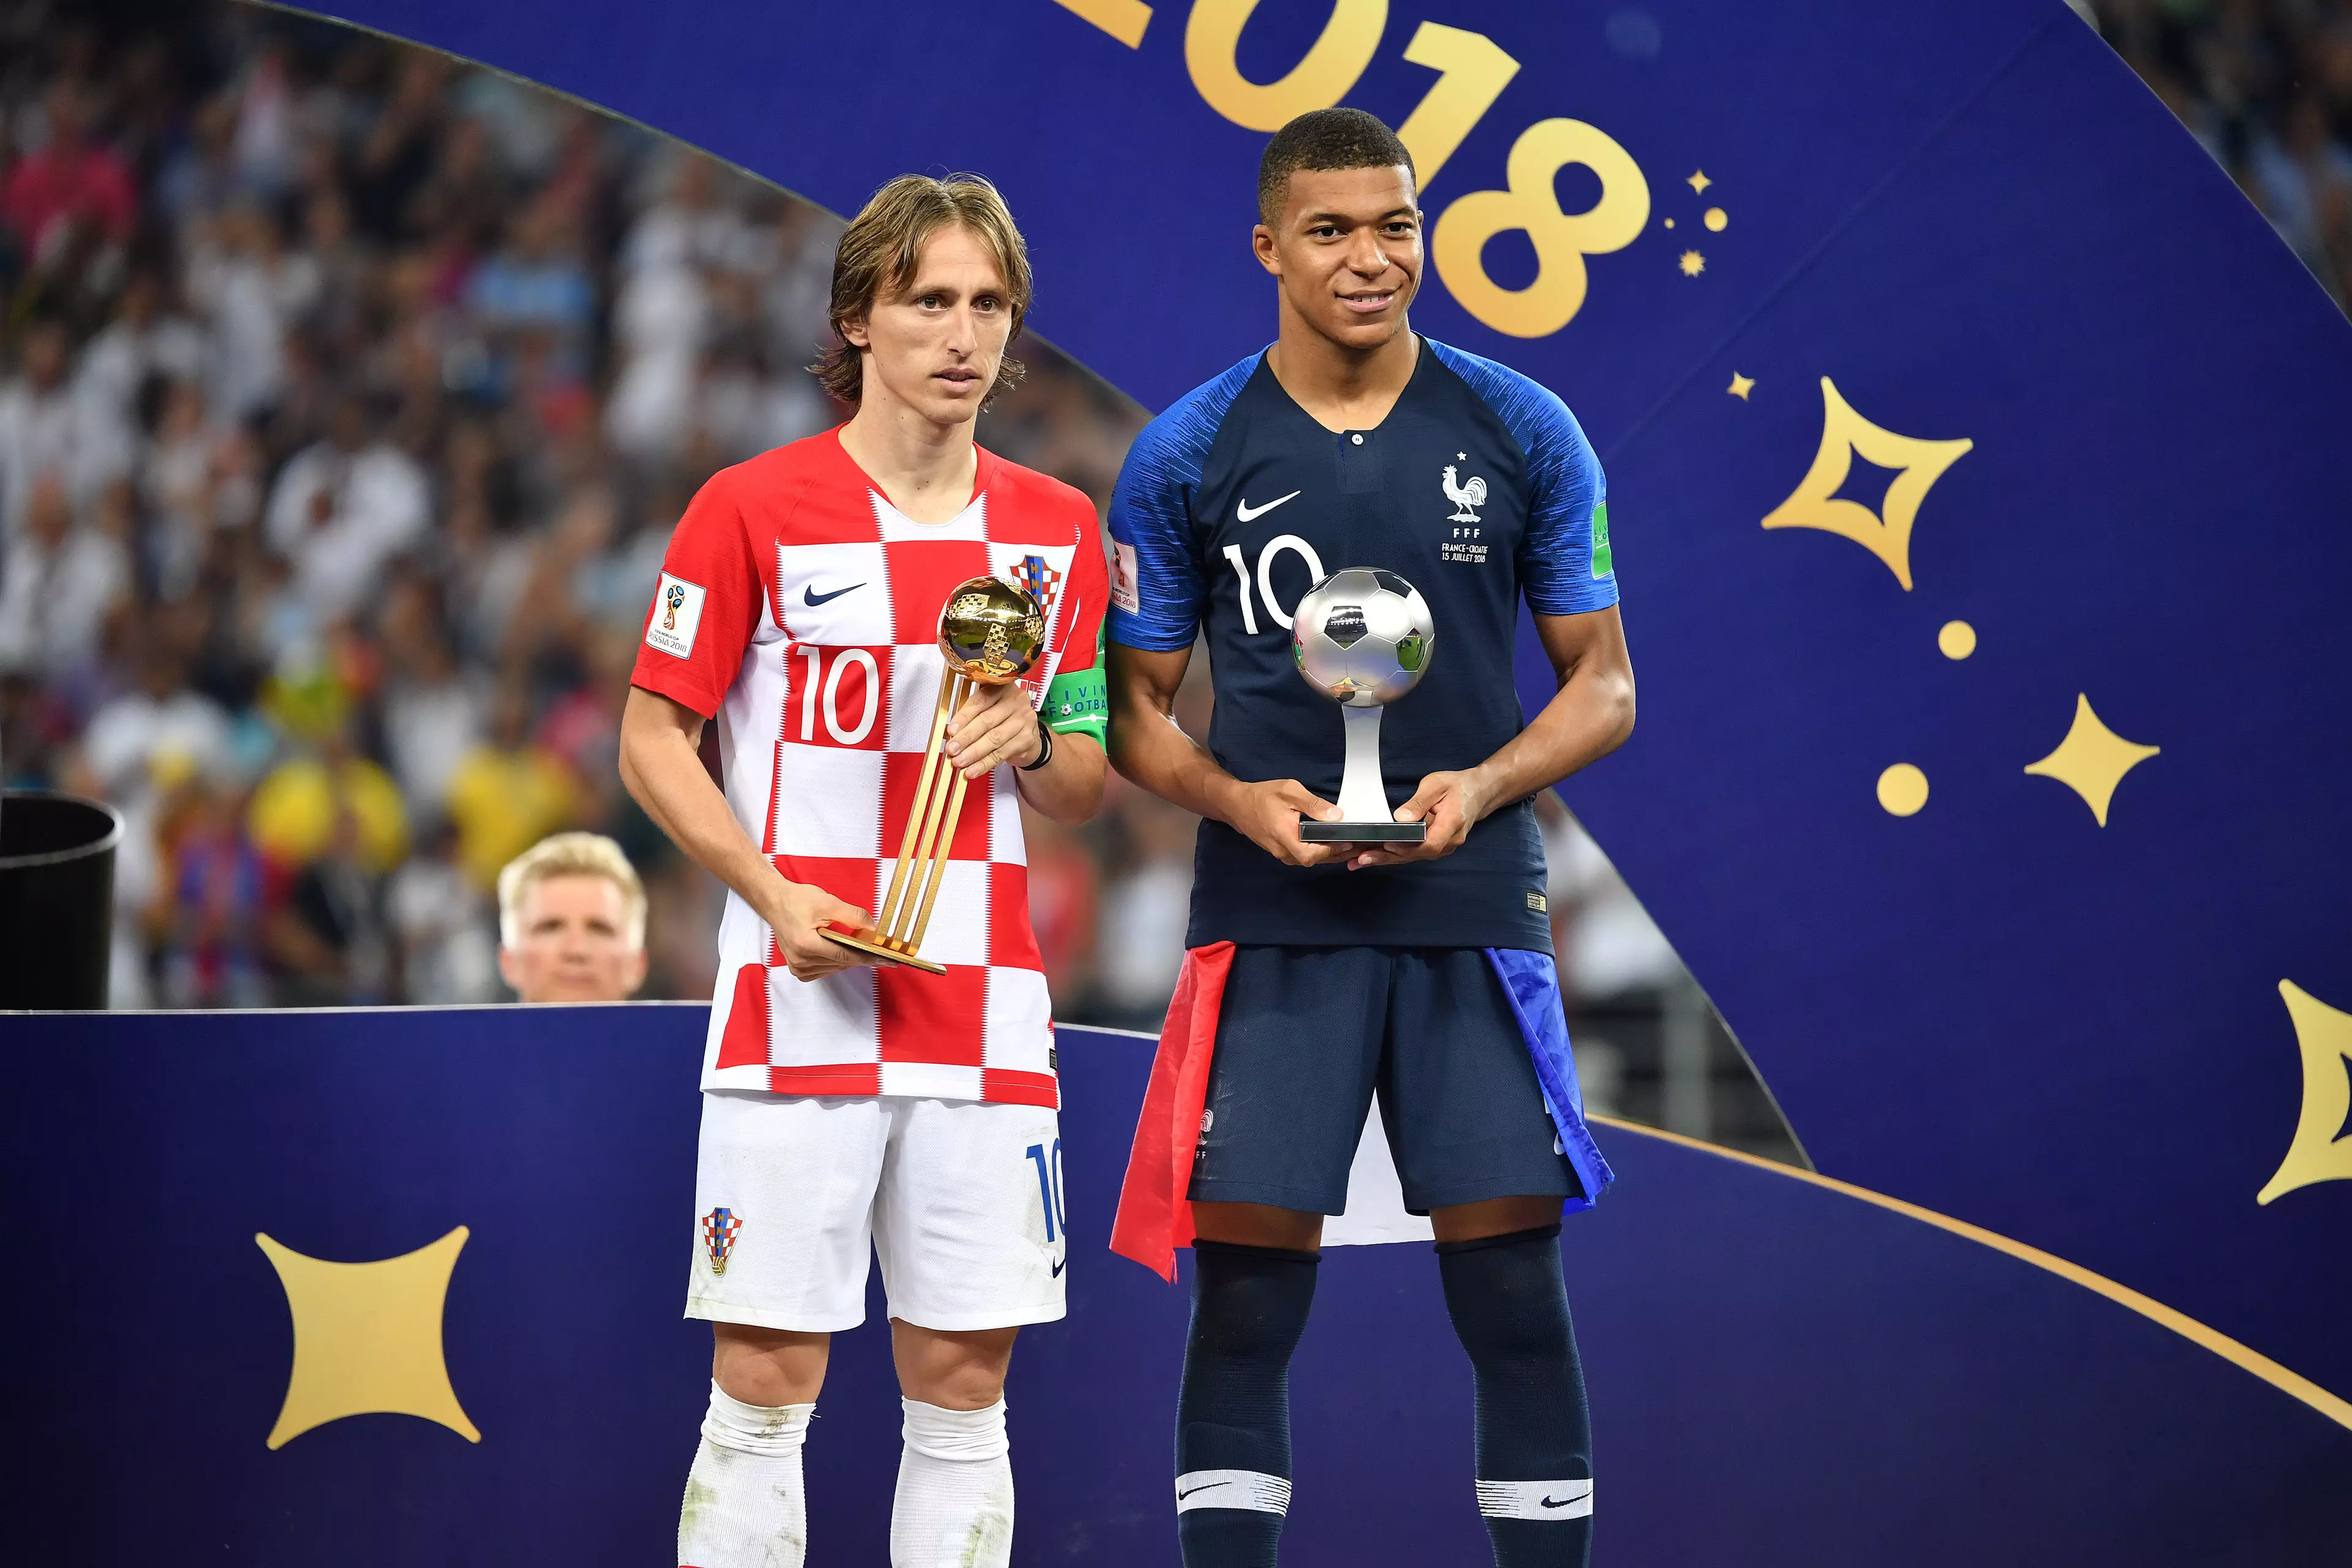 Modric captured the Golden Ball at the World Cup alongside Mbappe who won the Best Young Player. Image: PA Images